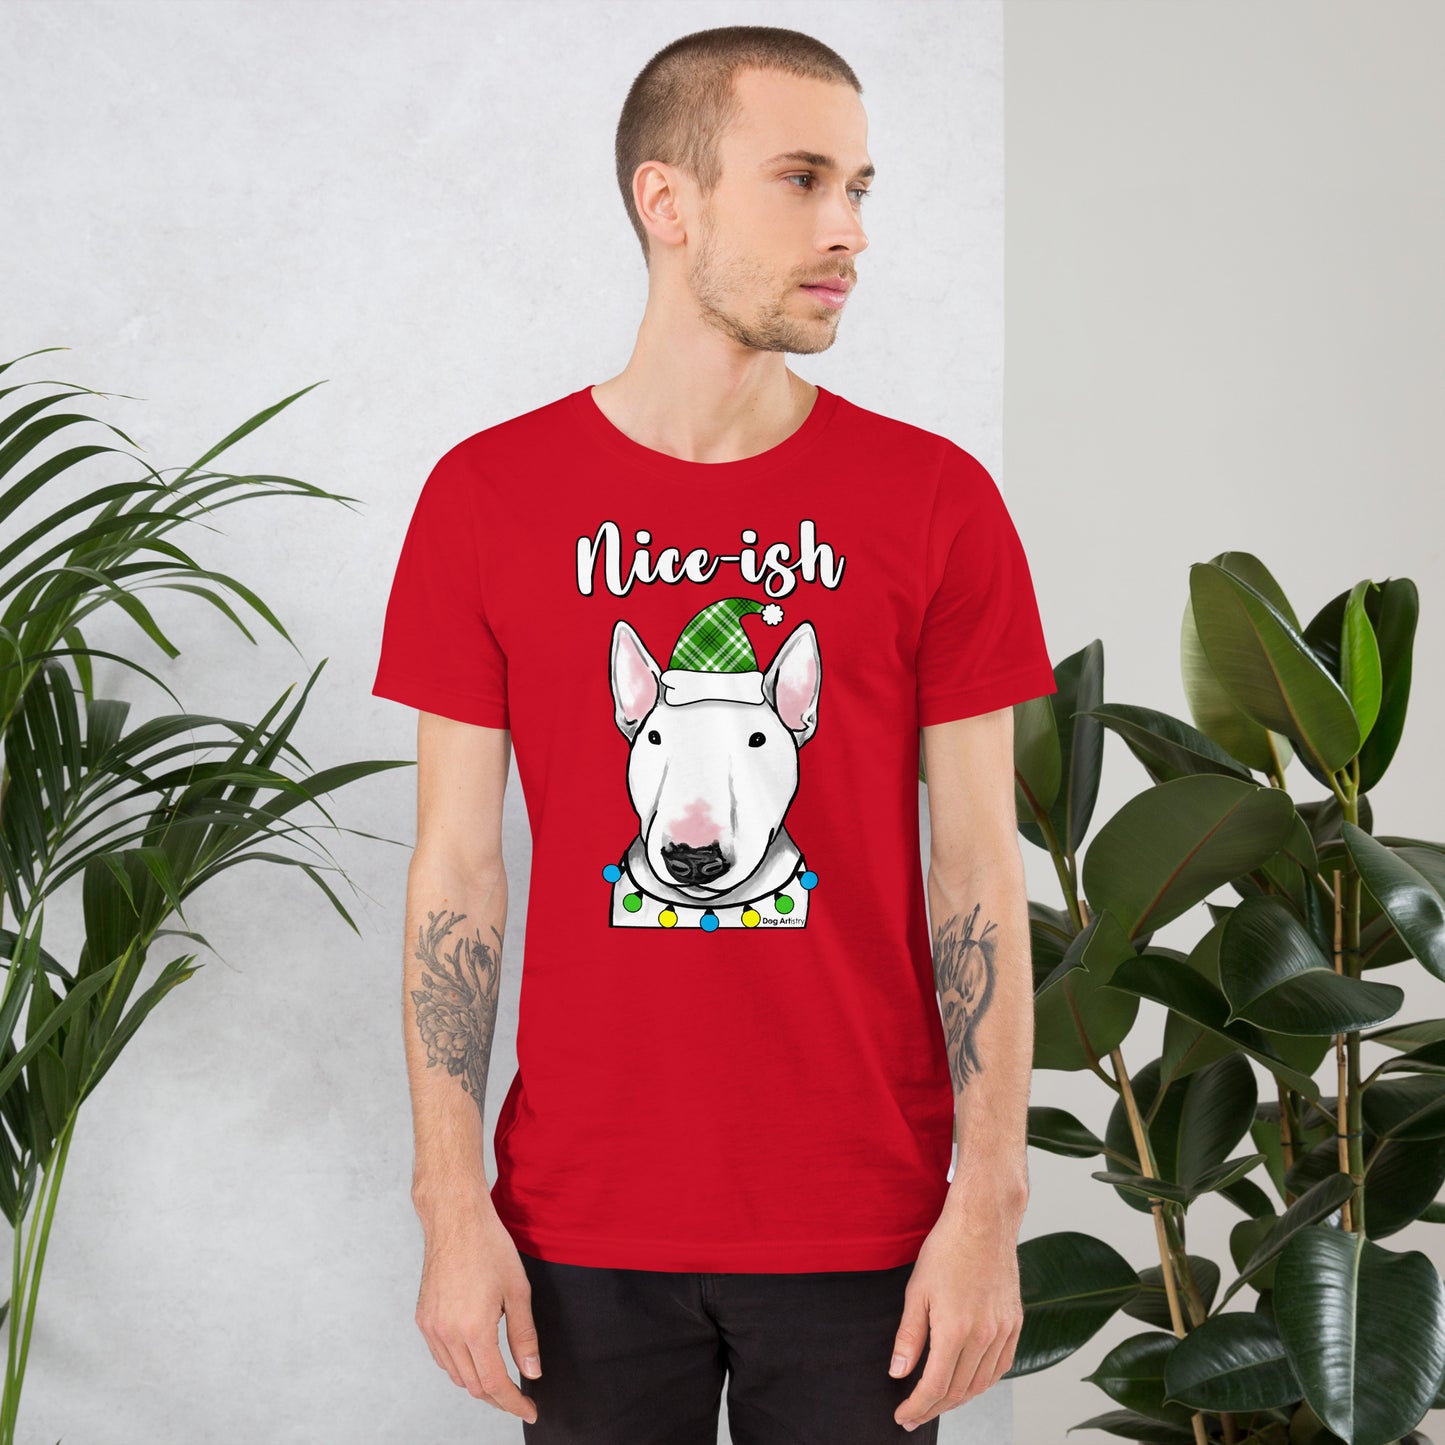 Nice-ish English Bull Terrier unisex t-shirt red by Dog Artistry.